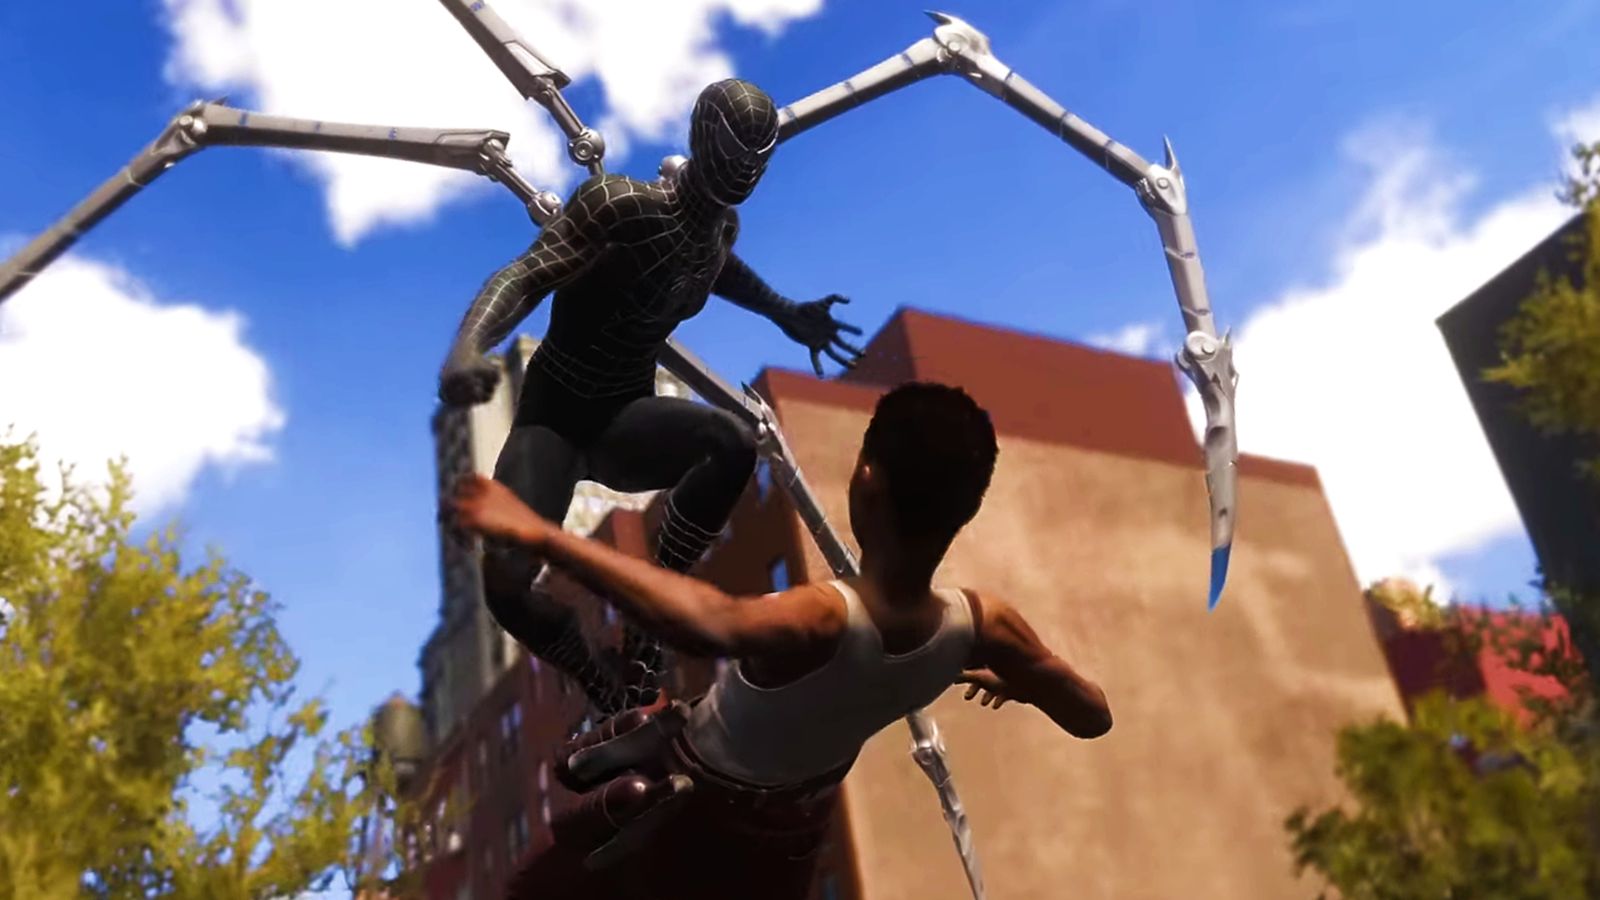 Spider-man in black with mechanical arms, leaping over a man in a tank top